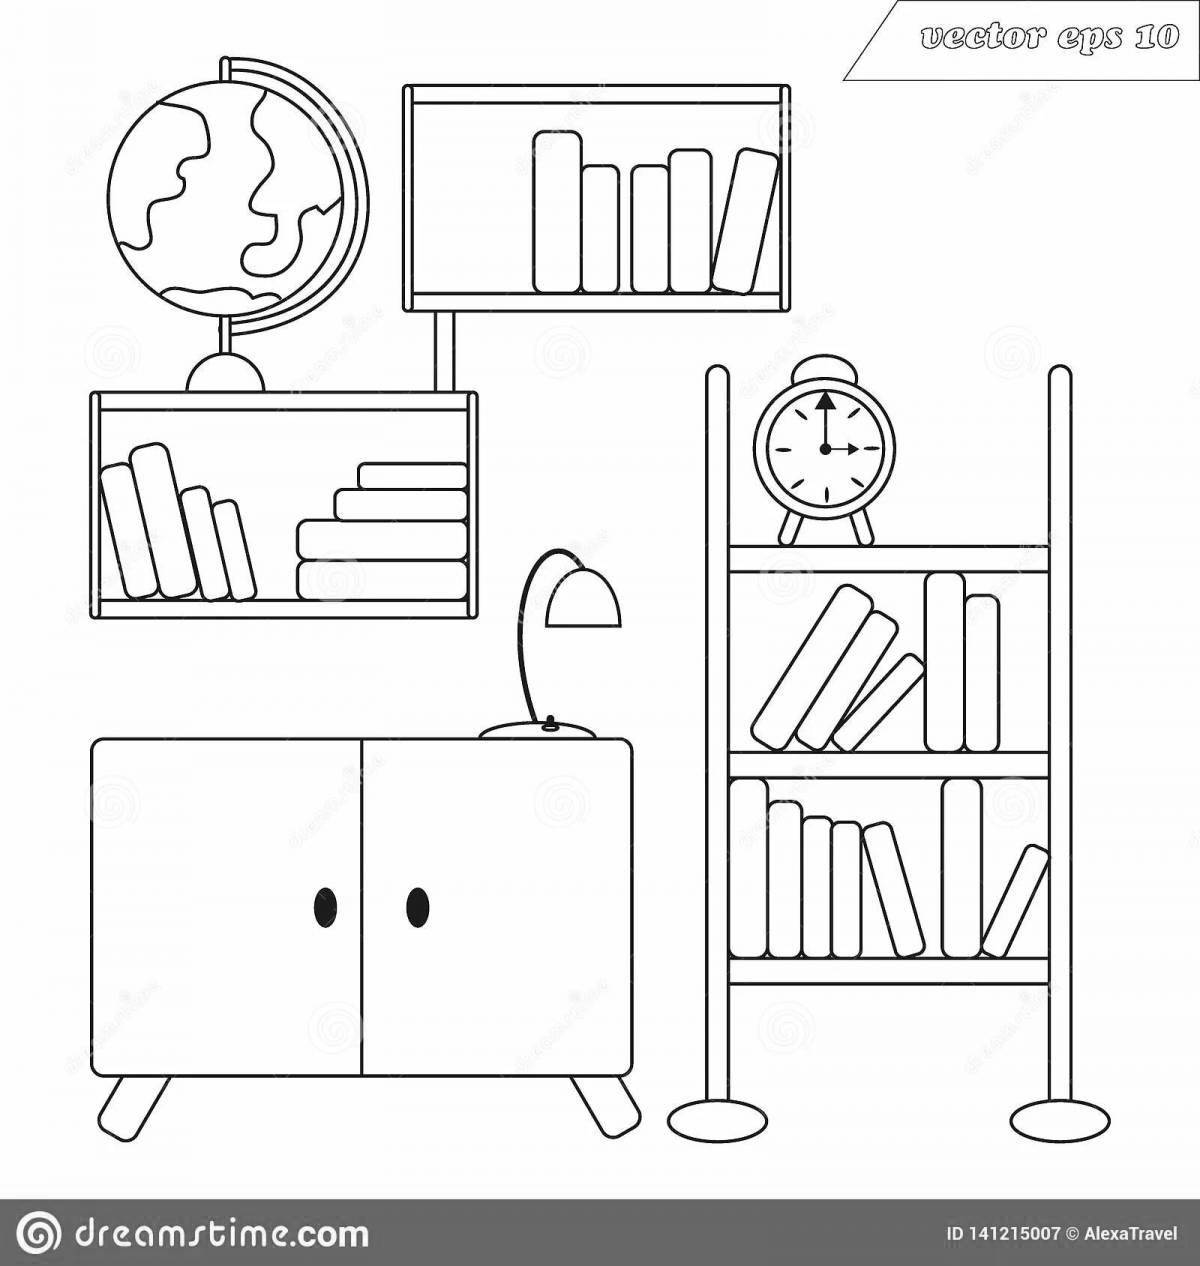 Sparkly bookshelf coloring page